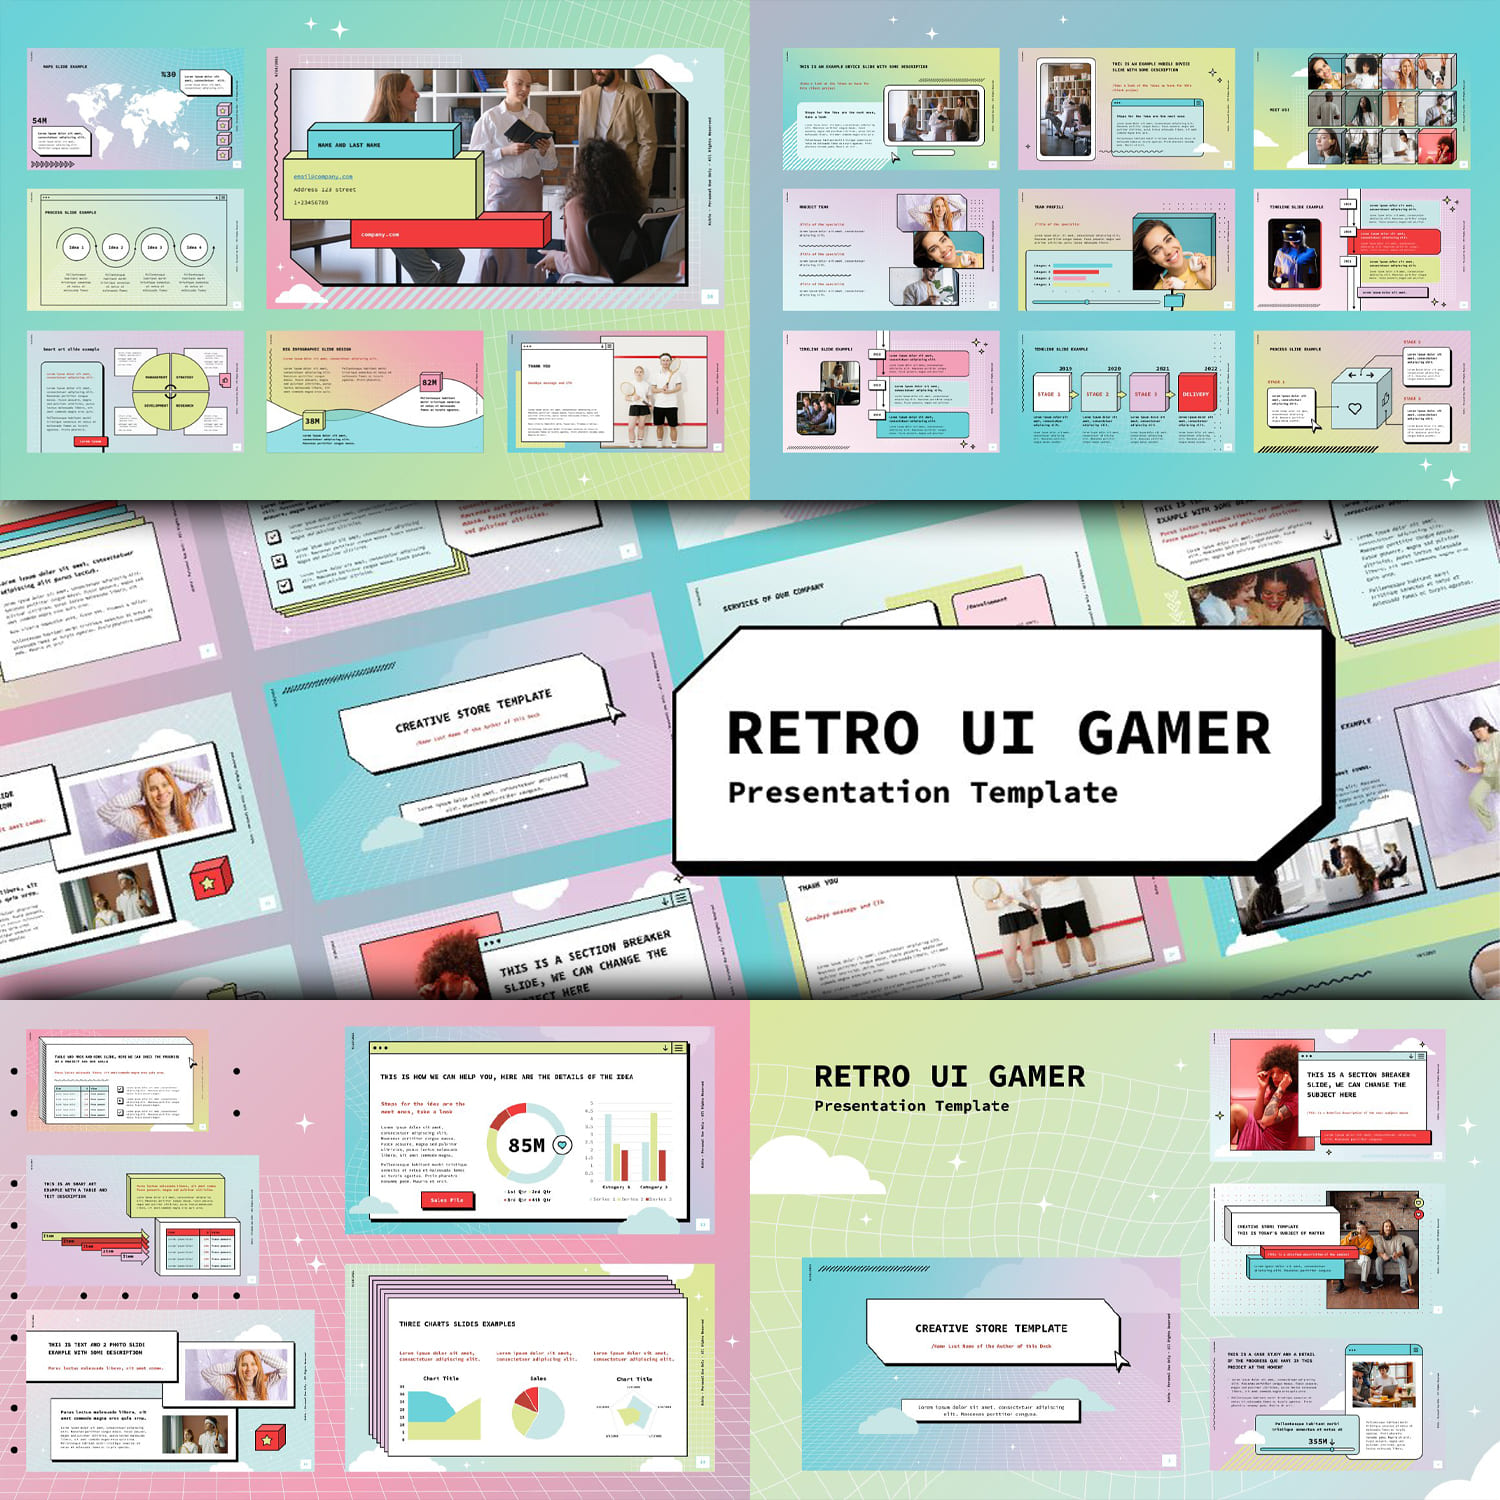 Retro UI Gamer - PowerPoint Template cover.